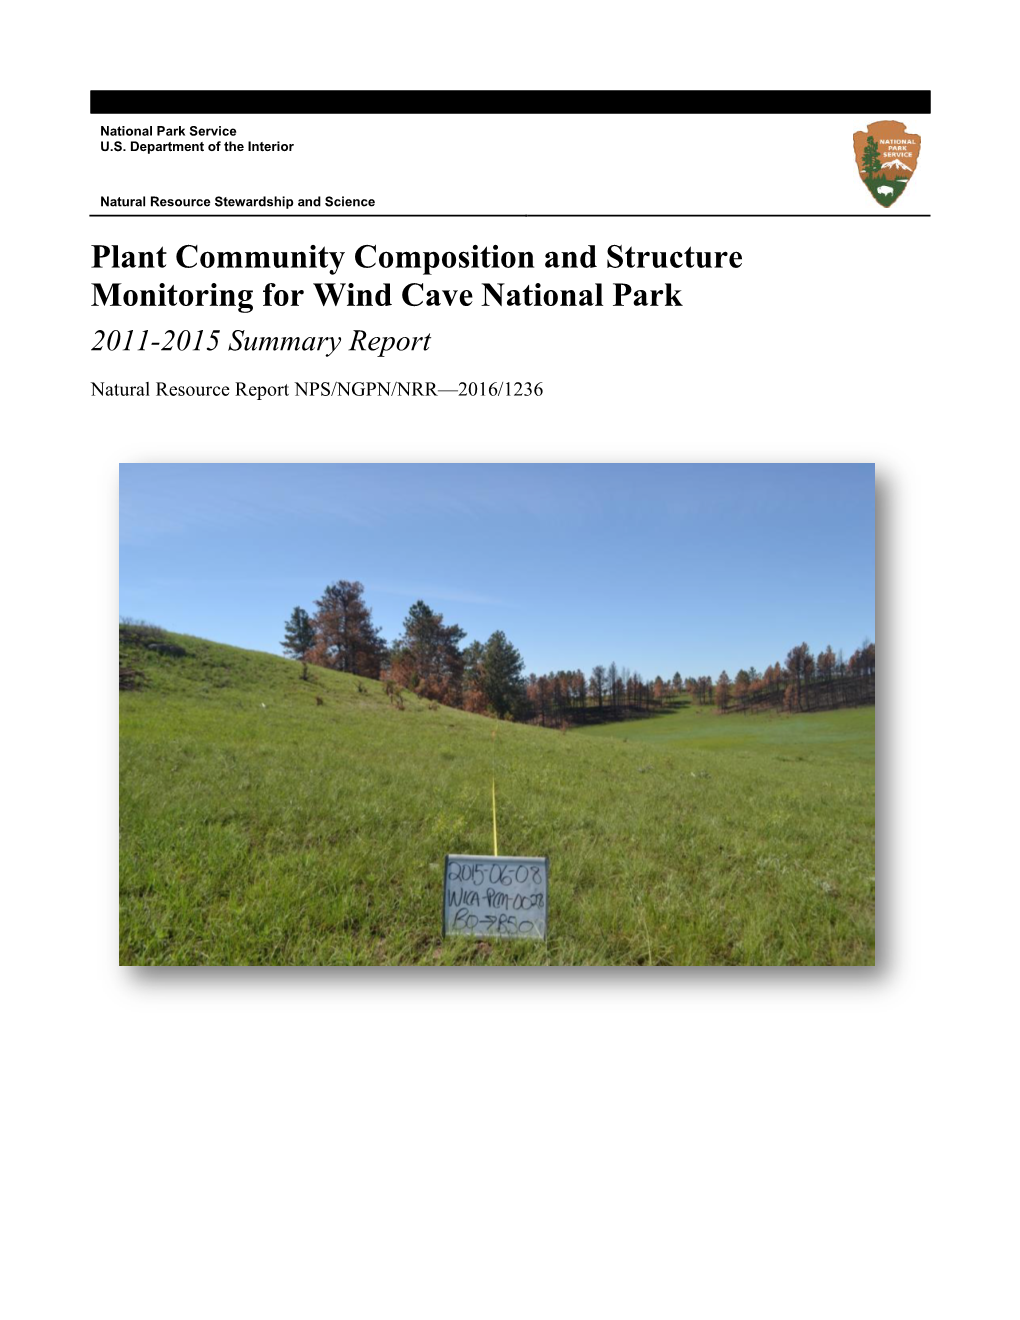 Plant Community Composition and Structure Monitoring for Wind Cave National Park 2011-2015 Summary Report